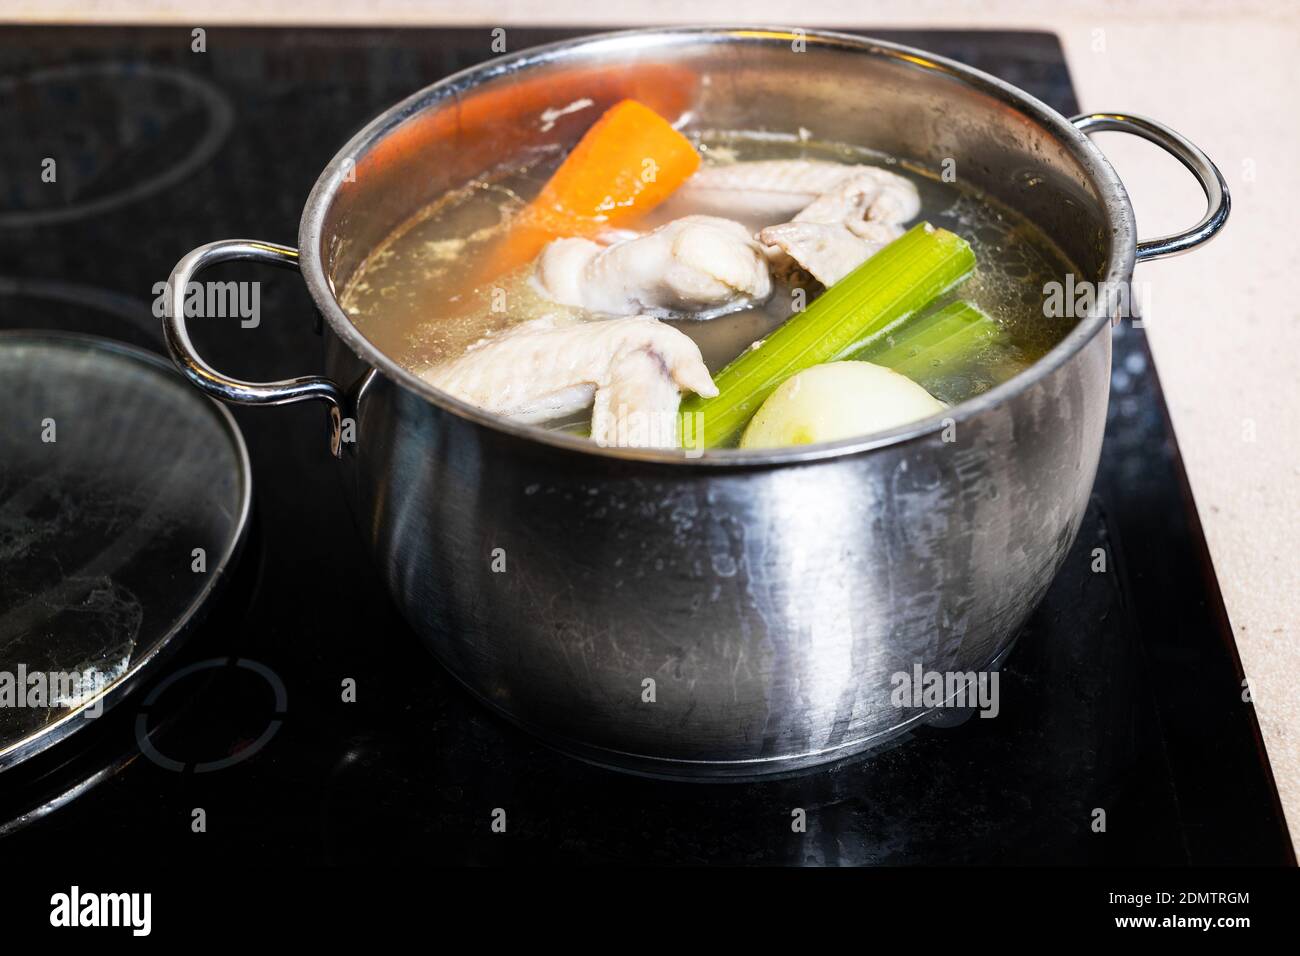 chicken wings soup is boiled in steel stewpot on stove at home kitchen isolated on white background Stock Photo